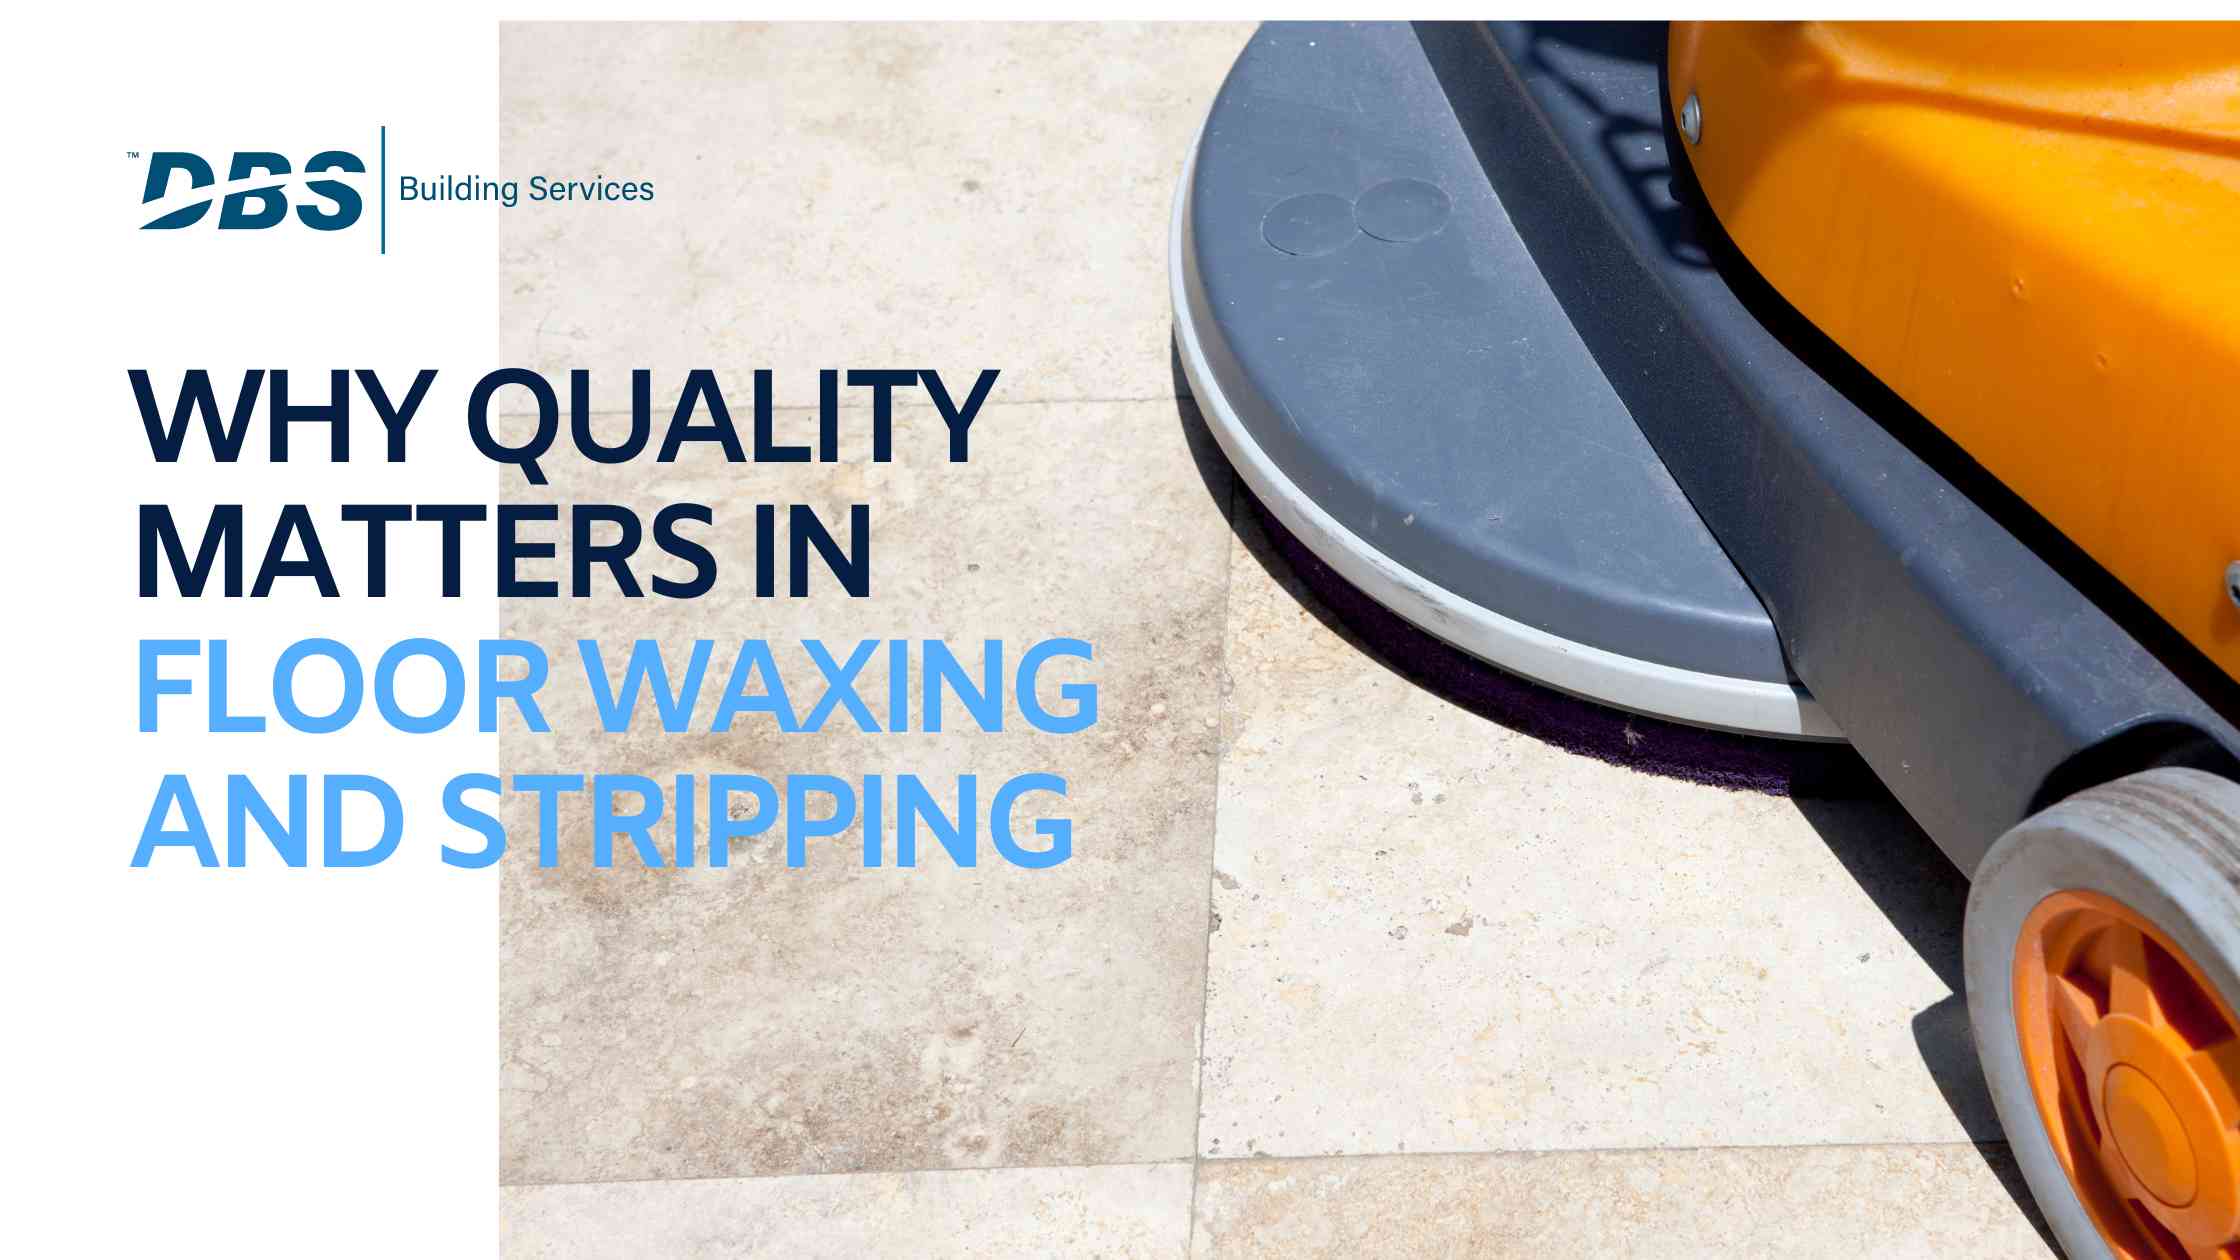 Quality Floor Waxing and Stripping